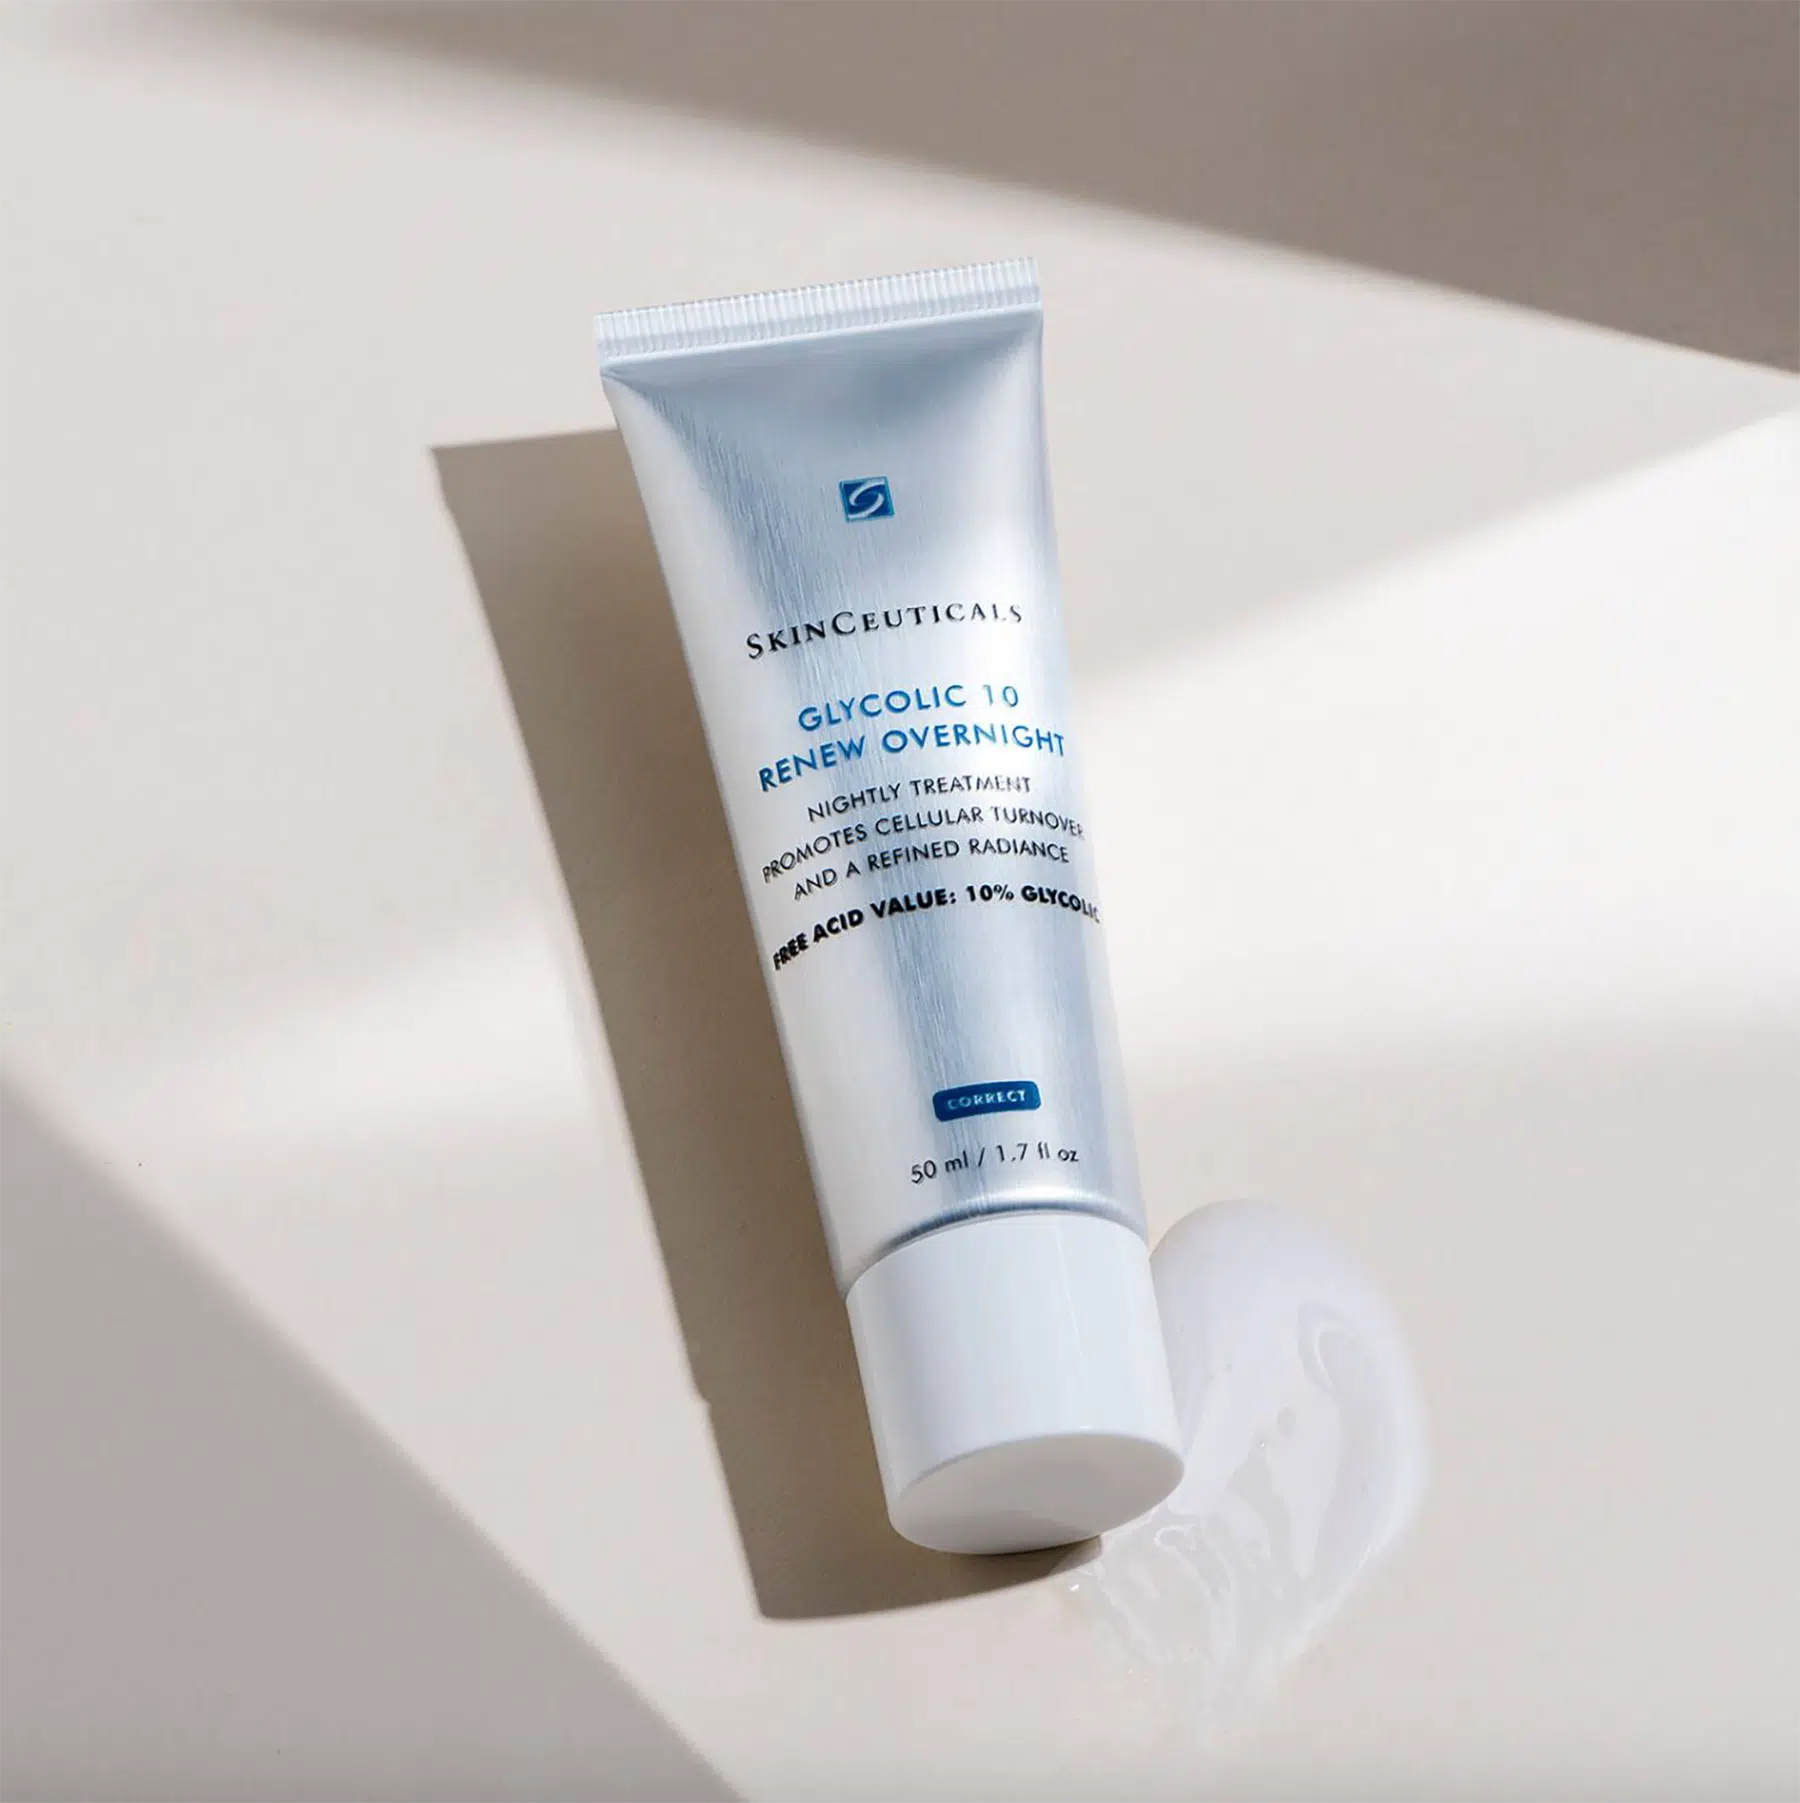 SkinCeuticals Glycolic 10 Renew Overnight review, by beauty blogger What The Fab